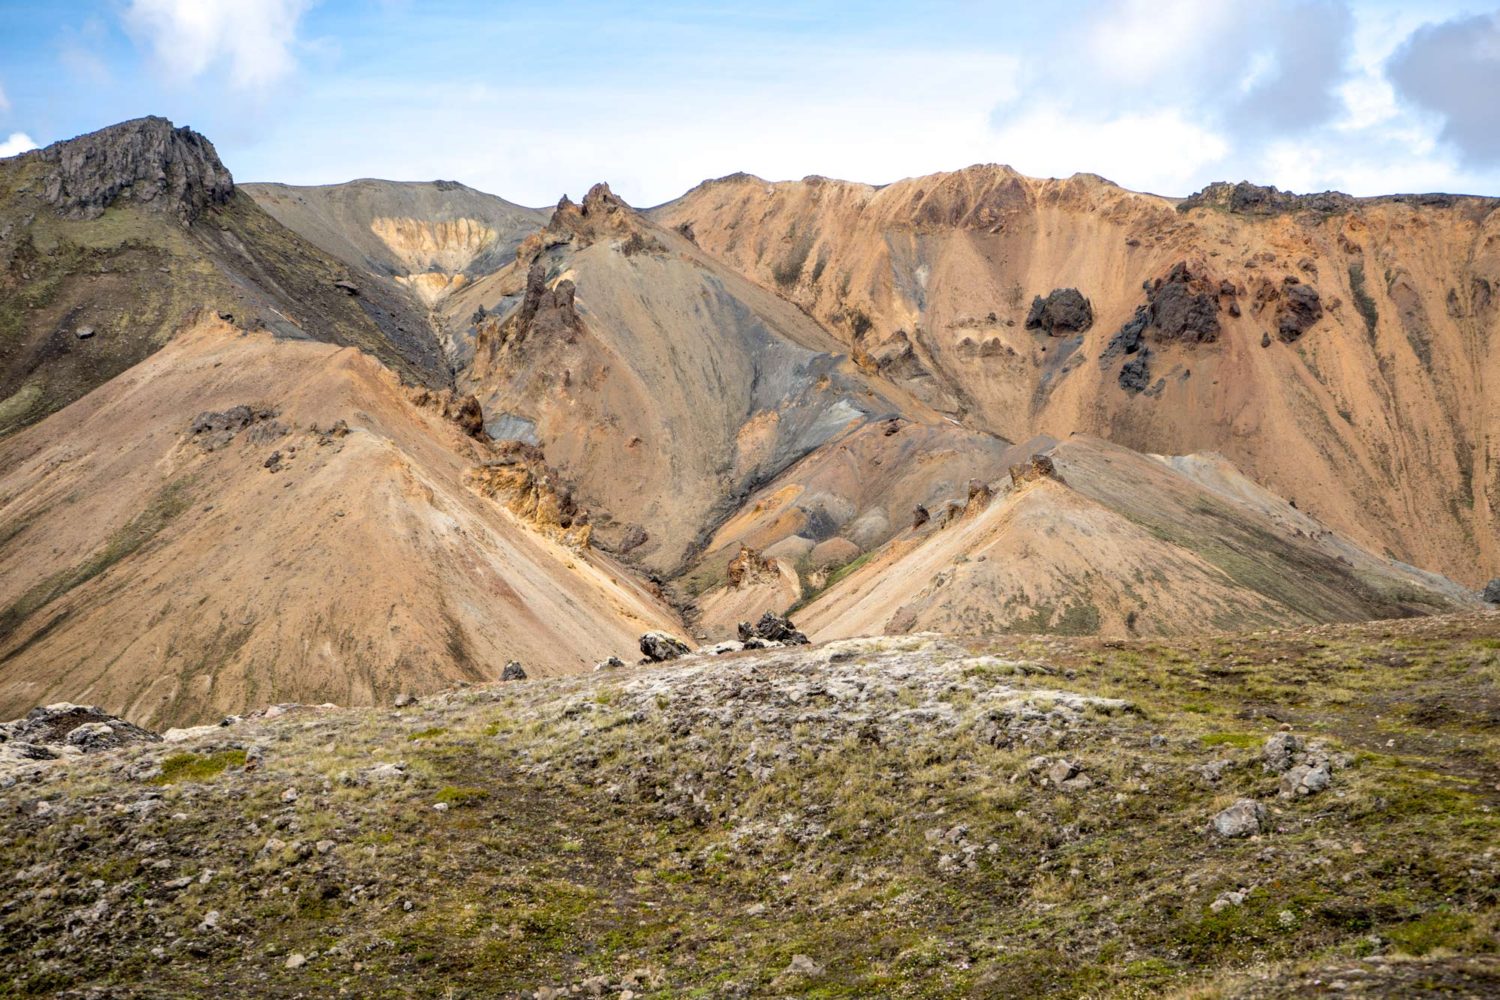 The colorful rhyolite mountains are the main attraction in Landmannalaugar.